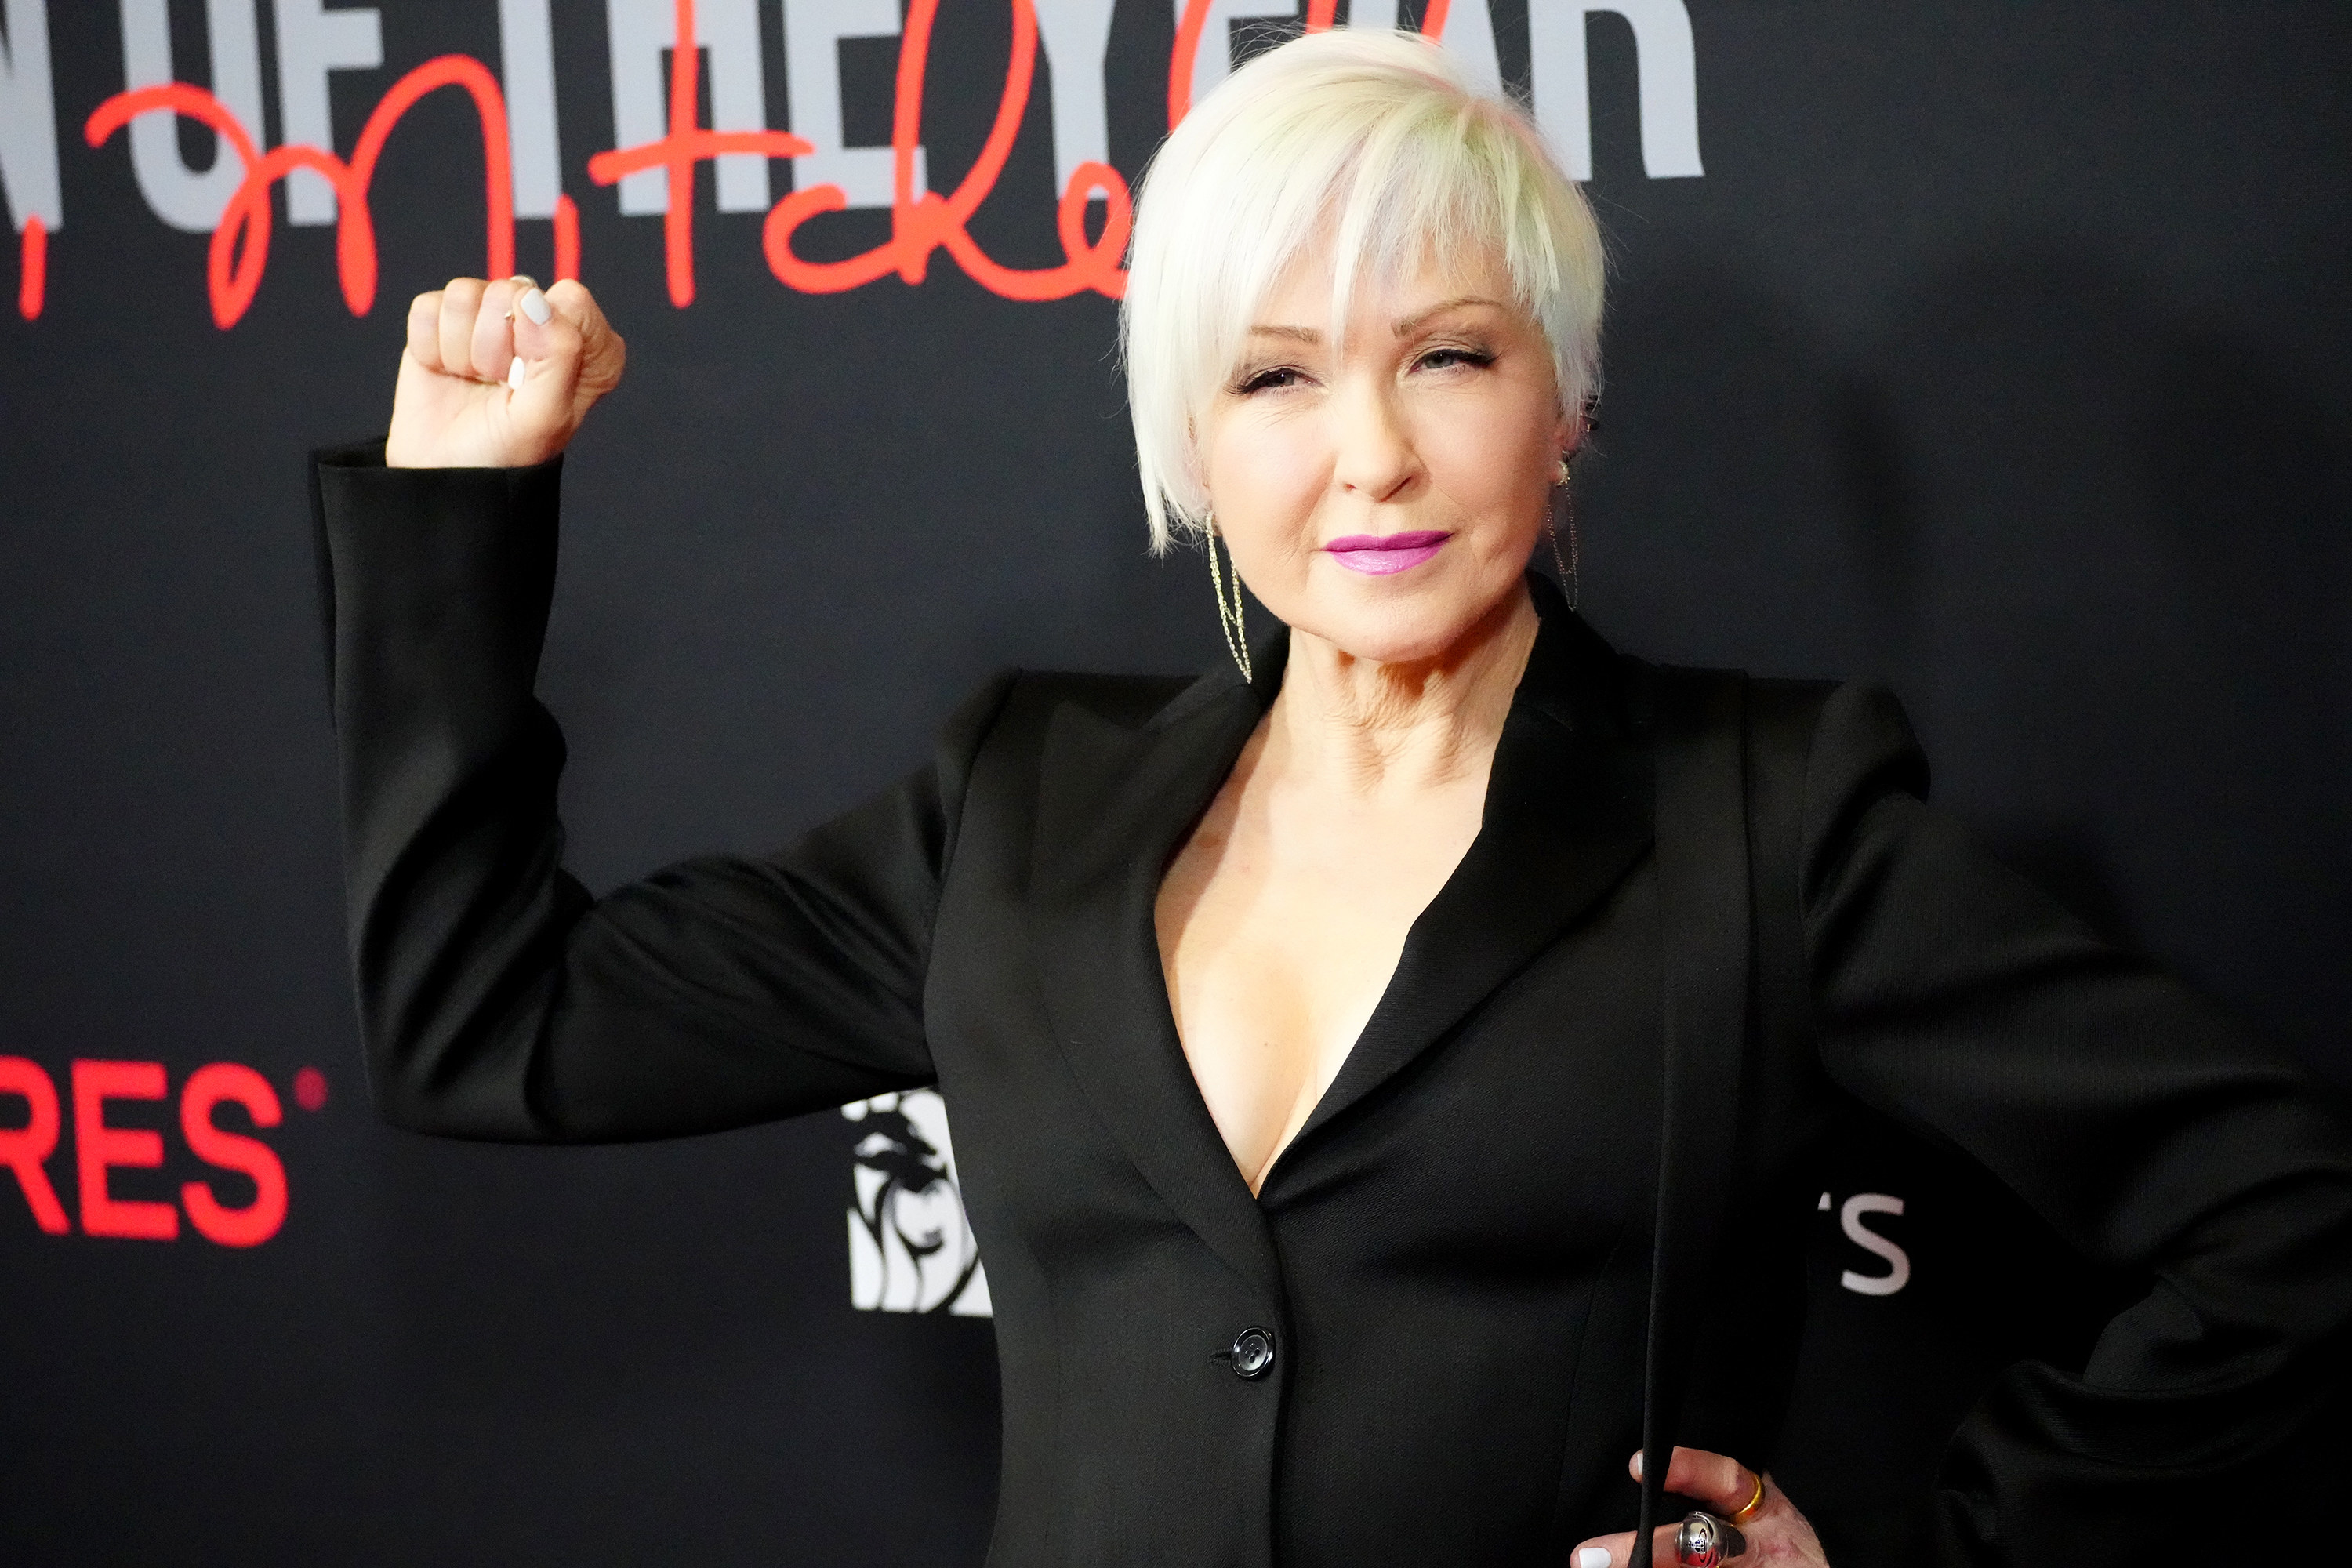 Cyndi Lauper attends MusiCares Person of the Year honoring Joni Mitchell